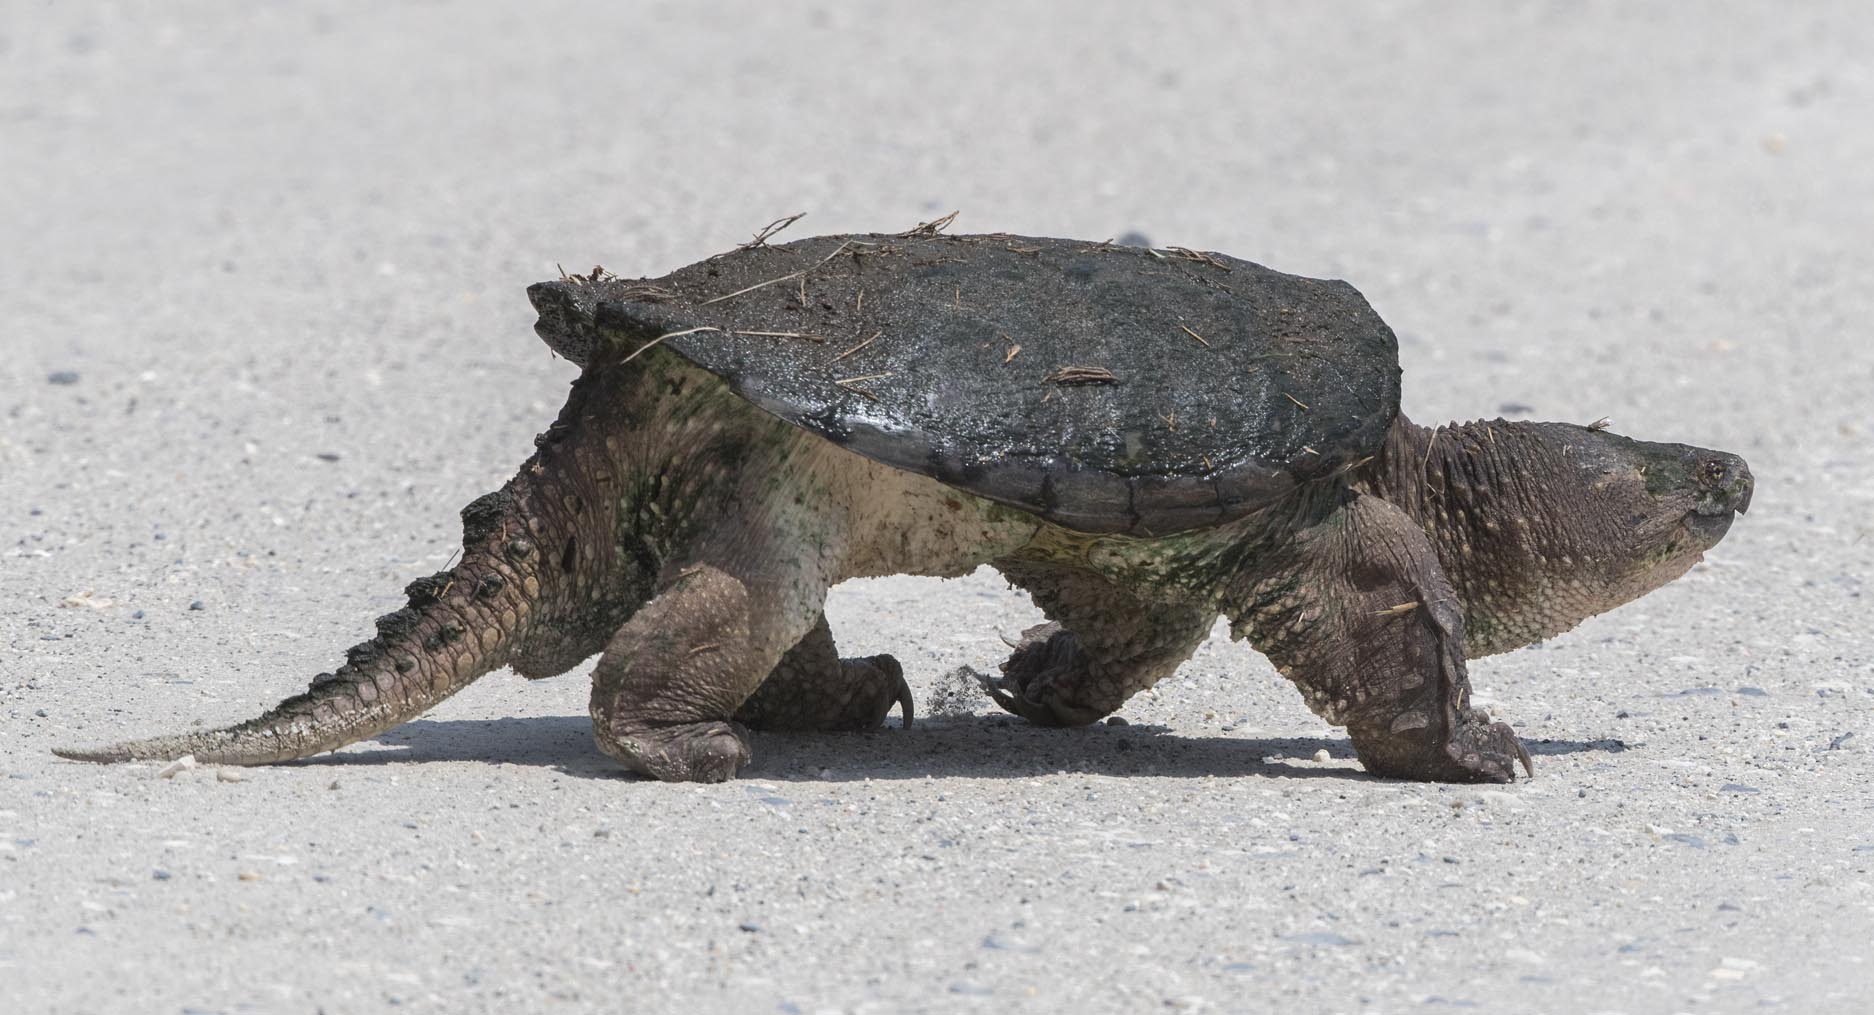 Snapping Turtle crossing road 0178s